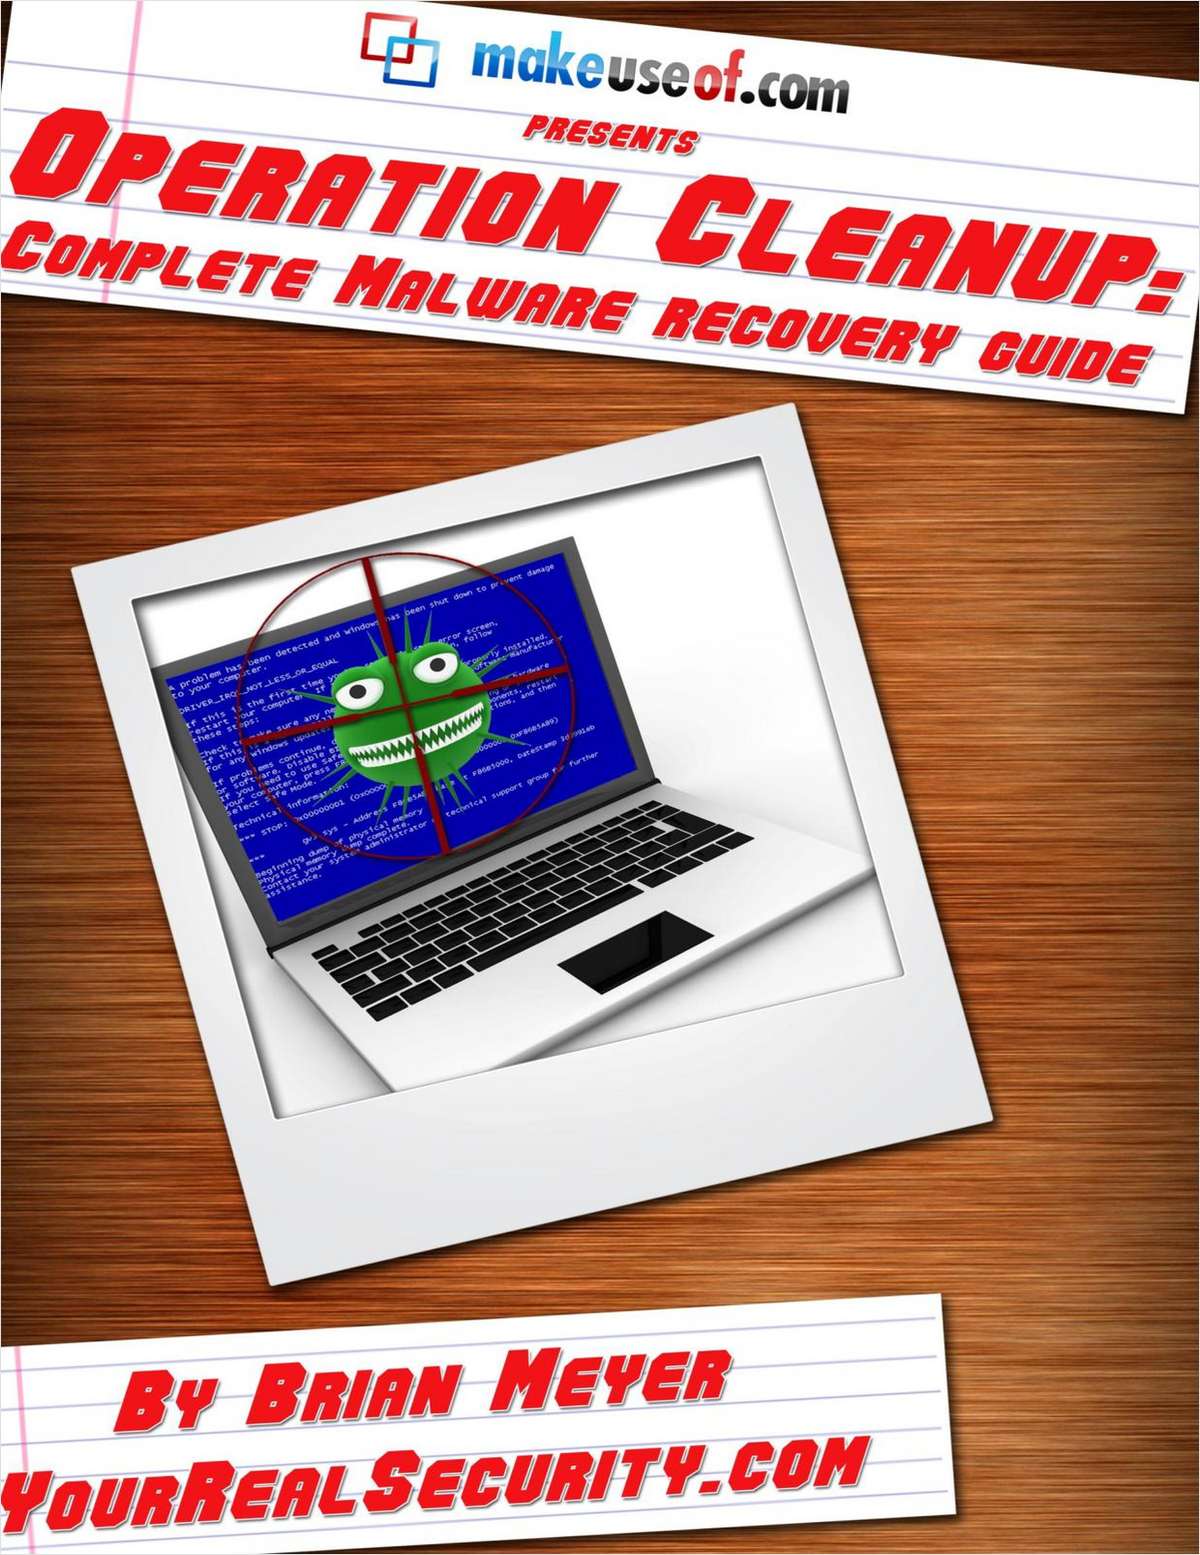 Operation Cleanup: Complete Malware Recovery Guide